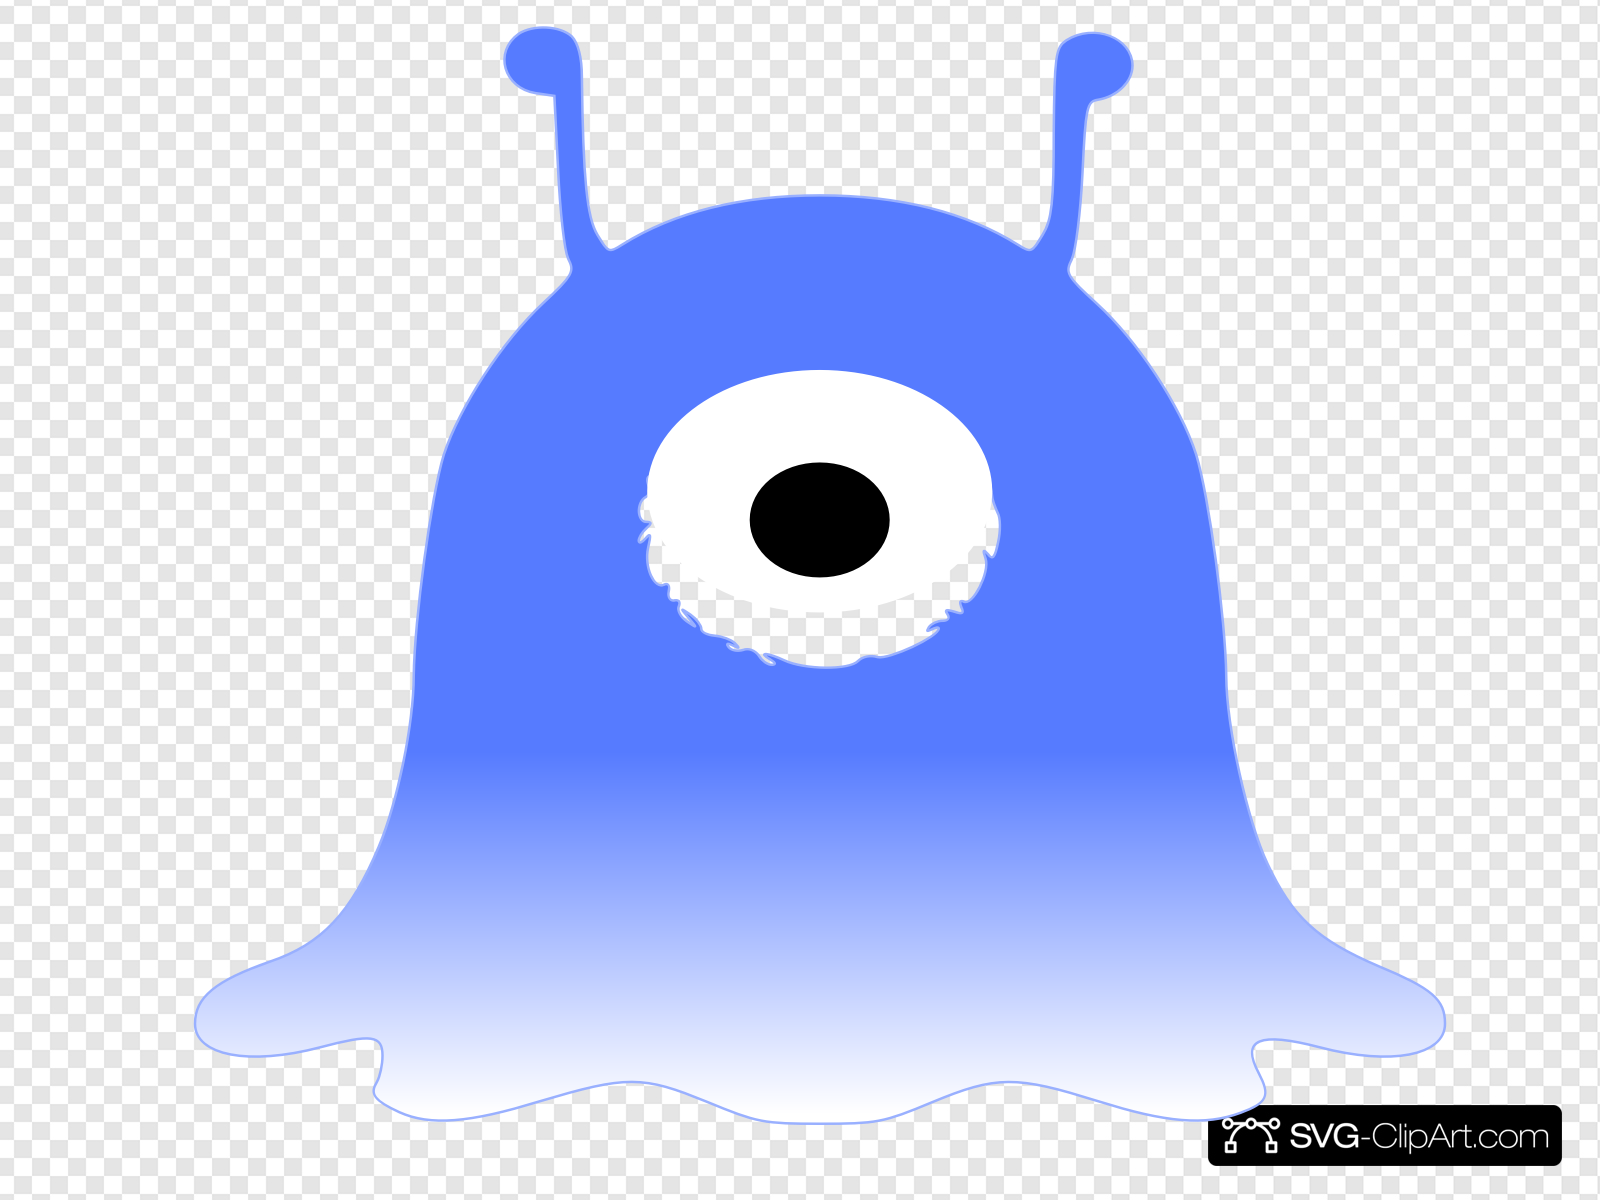 Blue One Eyed Monster Clip art, Icon and SVG.